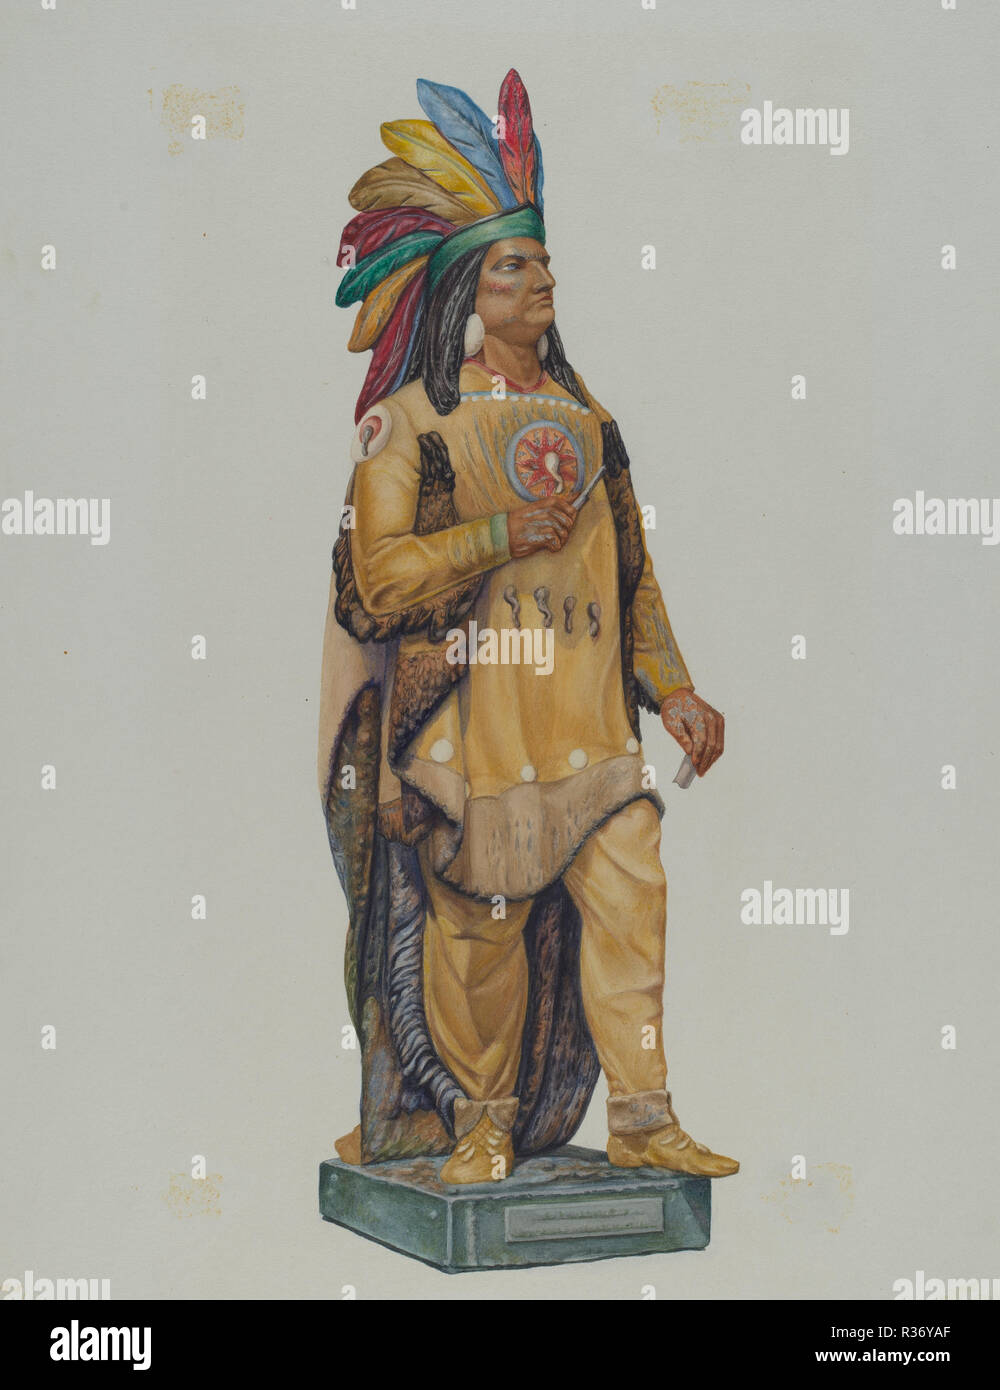 Cigar Store Indian. Dated: 1935/1942. Dimensions: overall: 48.8 x 36.2 cm (19 3/16 x 14 1/4 in.). Medium: watercolor and graphite on paperboard. Museum: National Gallery of Art, Washington DC. Author: Harriette Gale. Stock Photo